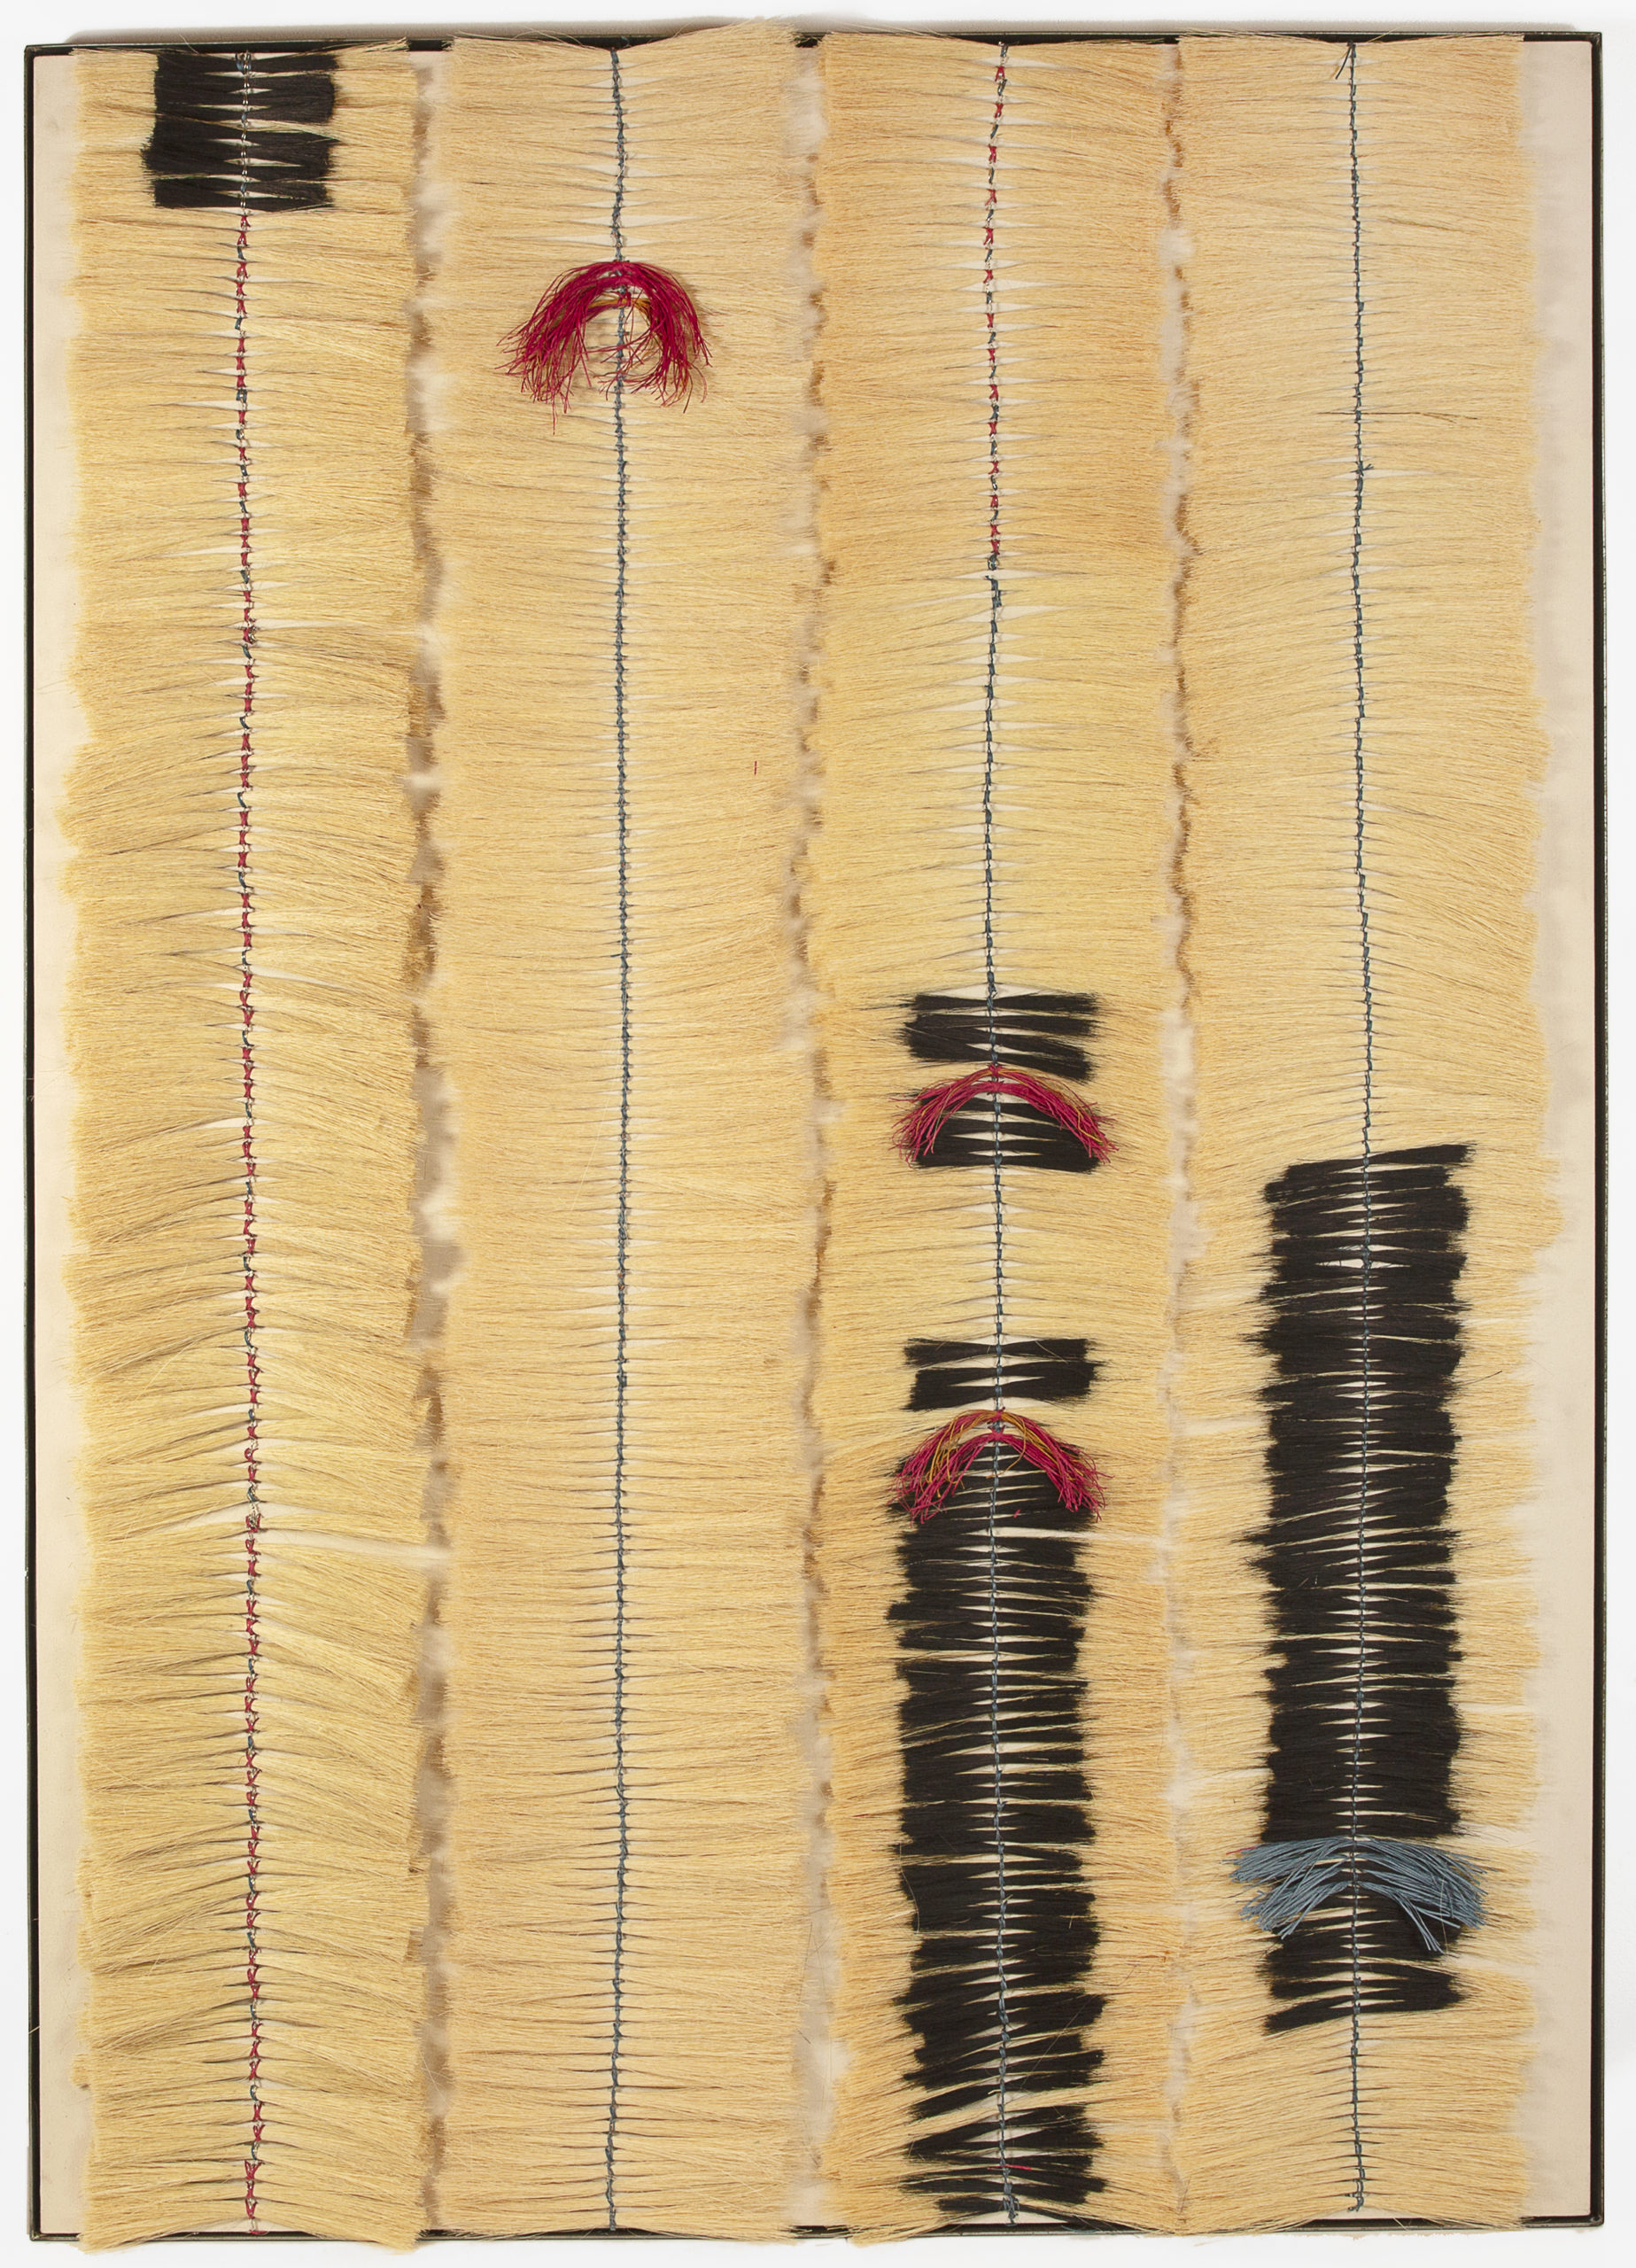 

											Elizabeth Hohimer</b>

											<em>
												Negotiated Desires</em> 

											<h4>
												May 21 - July 31											</h4>

		                																																<i>Pink and Blue Ribbons,</i>  
																																								2021, 
																																								tampico fiber, wire, cotton in steel frame, 
																																								84 x 60 x 2 1/2 inches 
																								
		                				